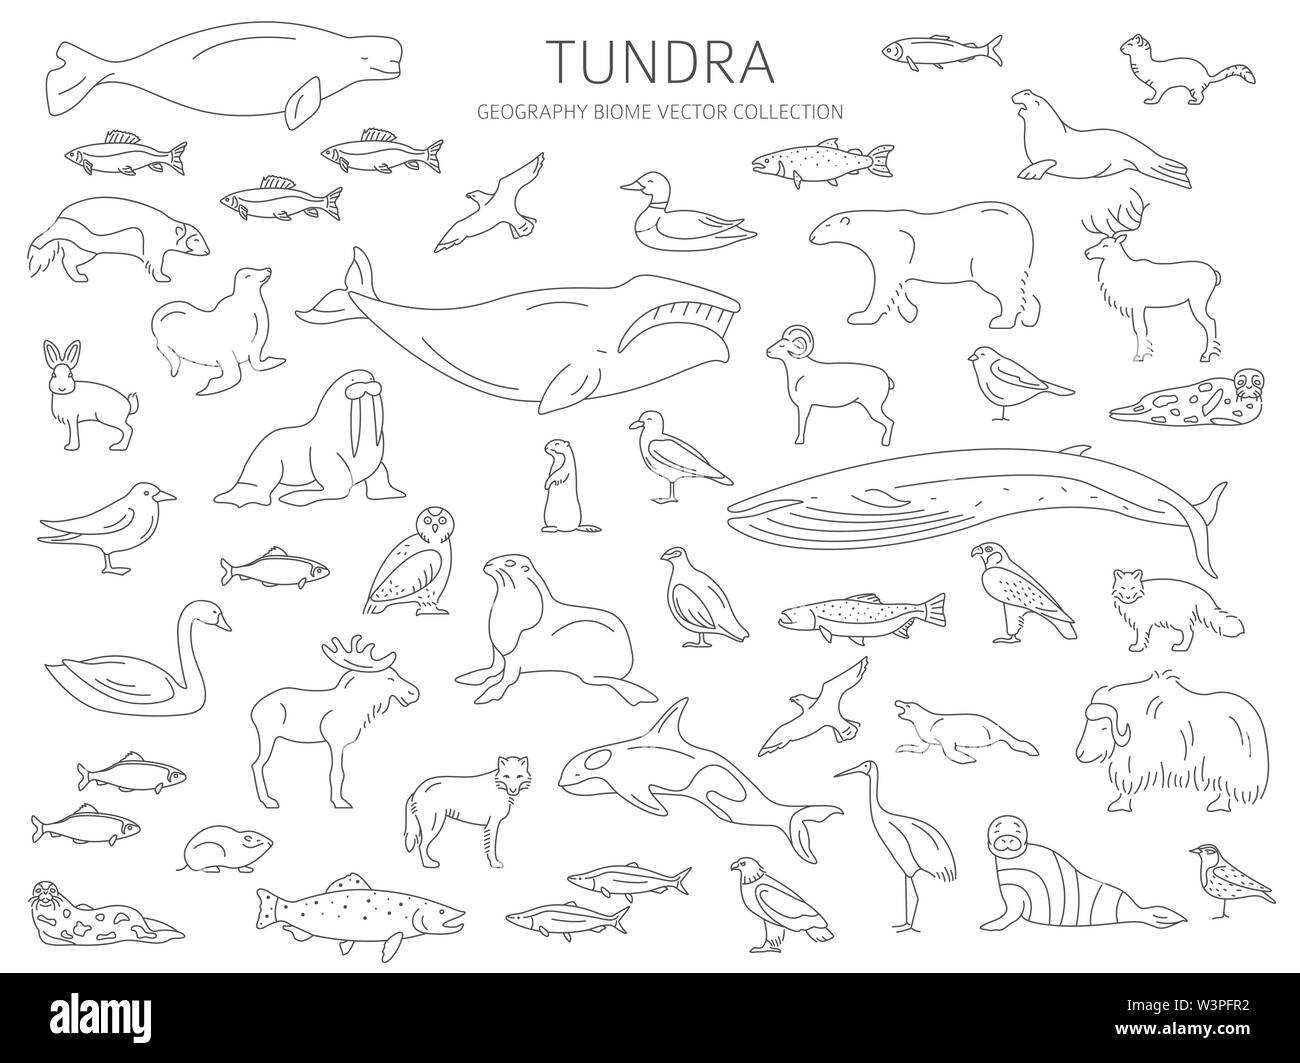 Tundra biome. Simple line style. Terrestrial ecosystem world map. Arctic animals, birds, fish and plants infographic design. Vector illustration Stock Vector